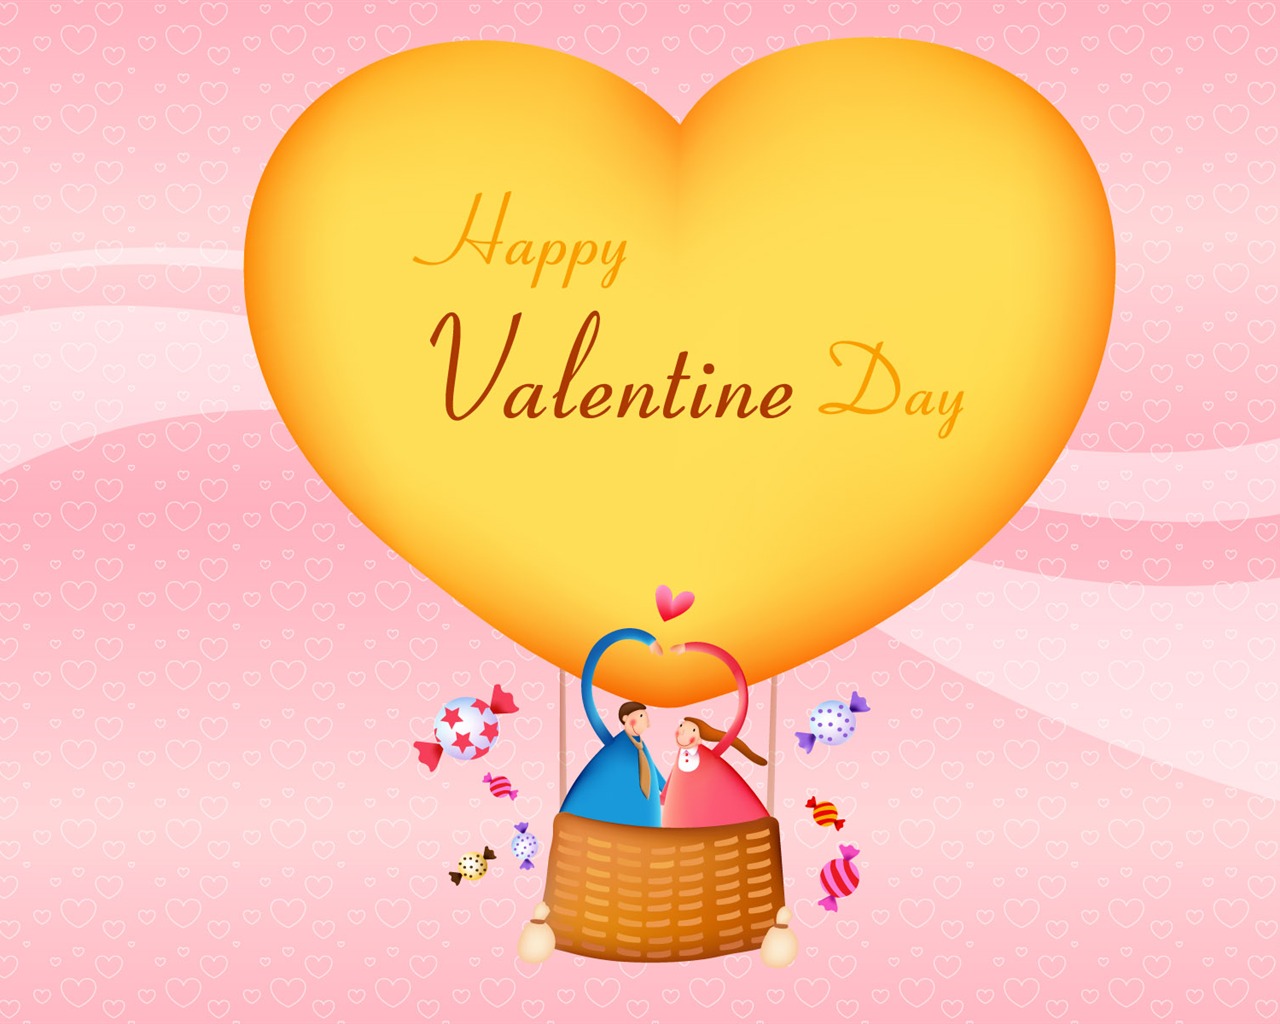 Valentine's Day Theme Wallpapers (2) #14 - 1280x1024